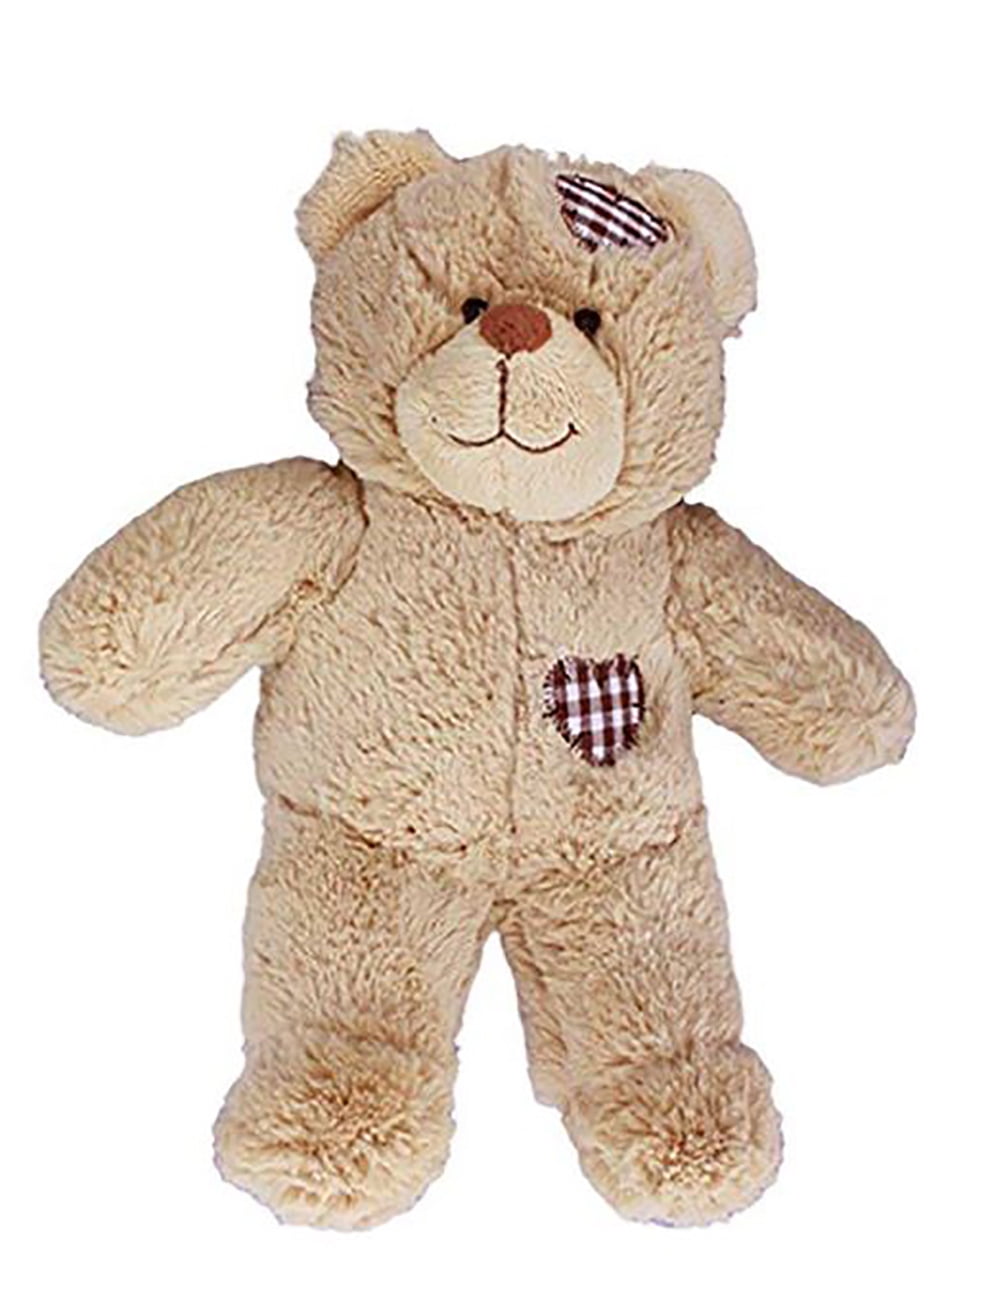 Mousehouse 32cm Very Soft Traditional  Brown Plush Teddy Bear Soft Toy 